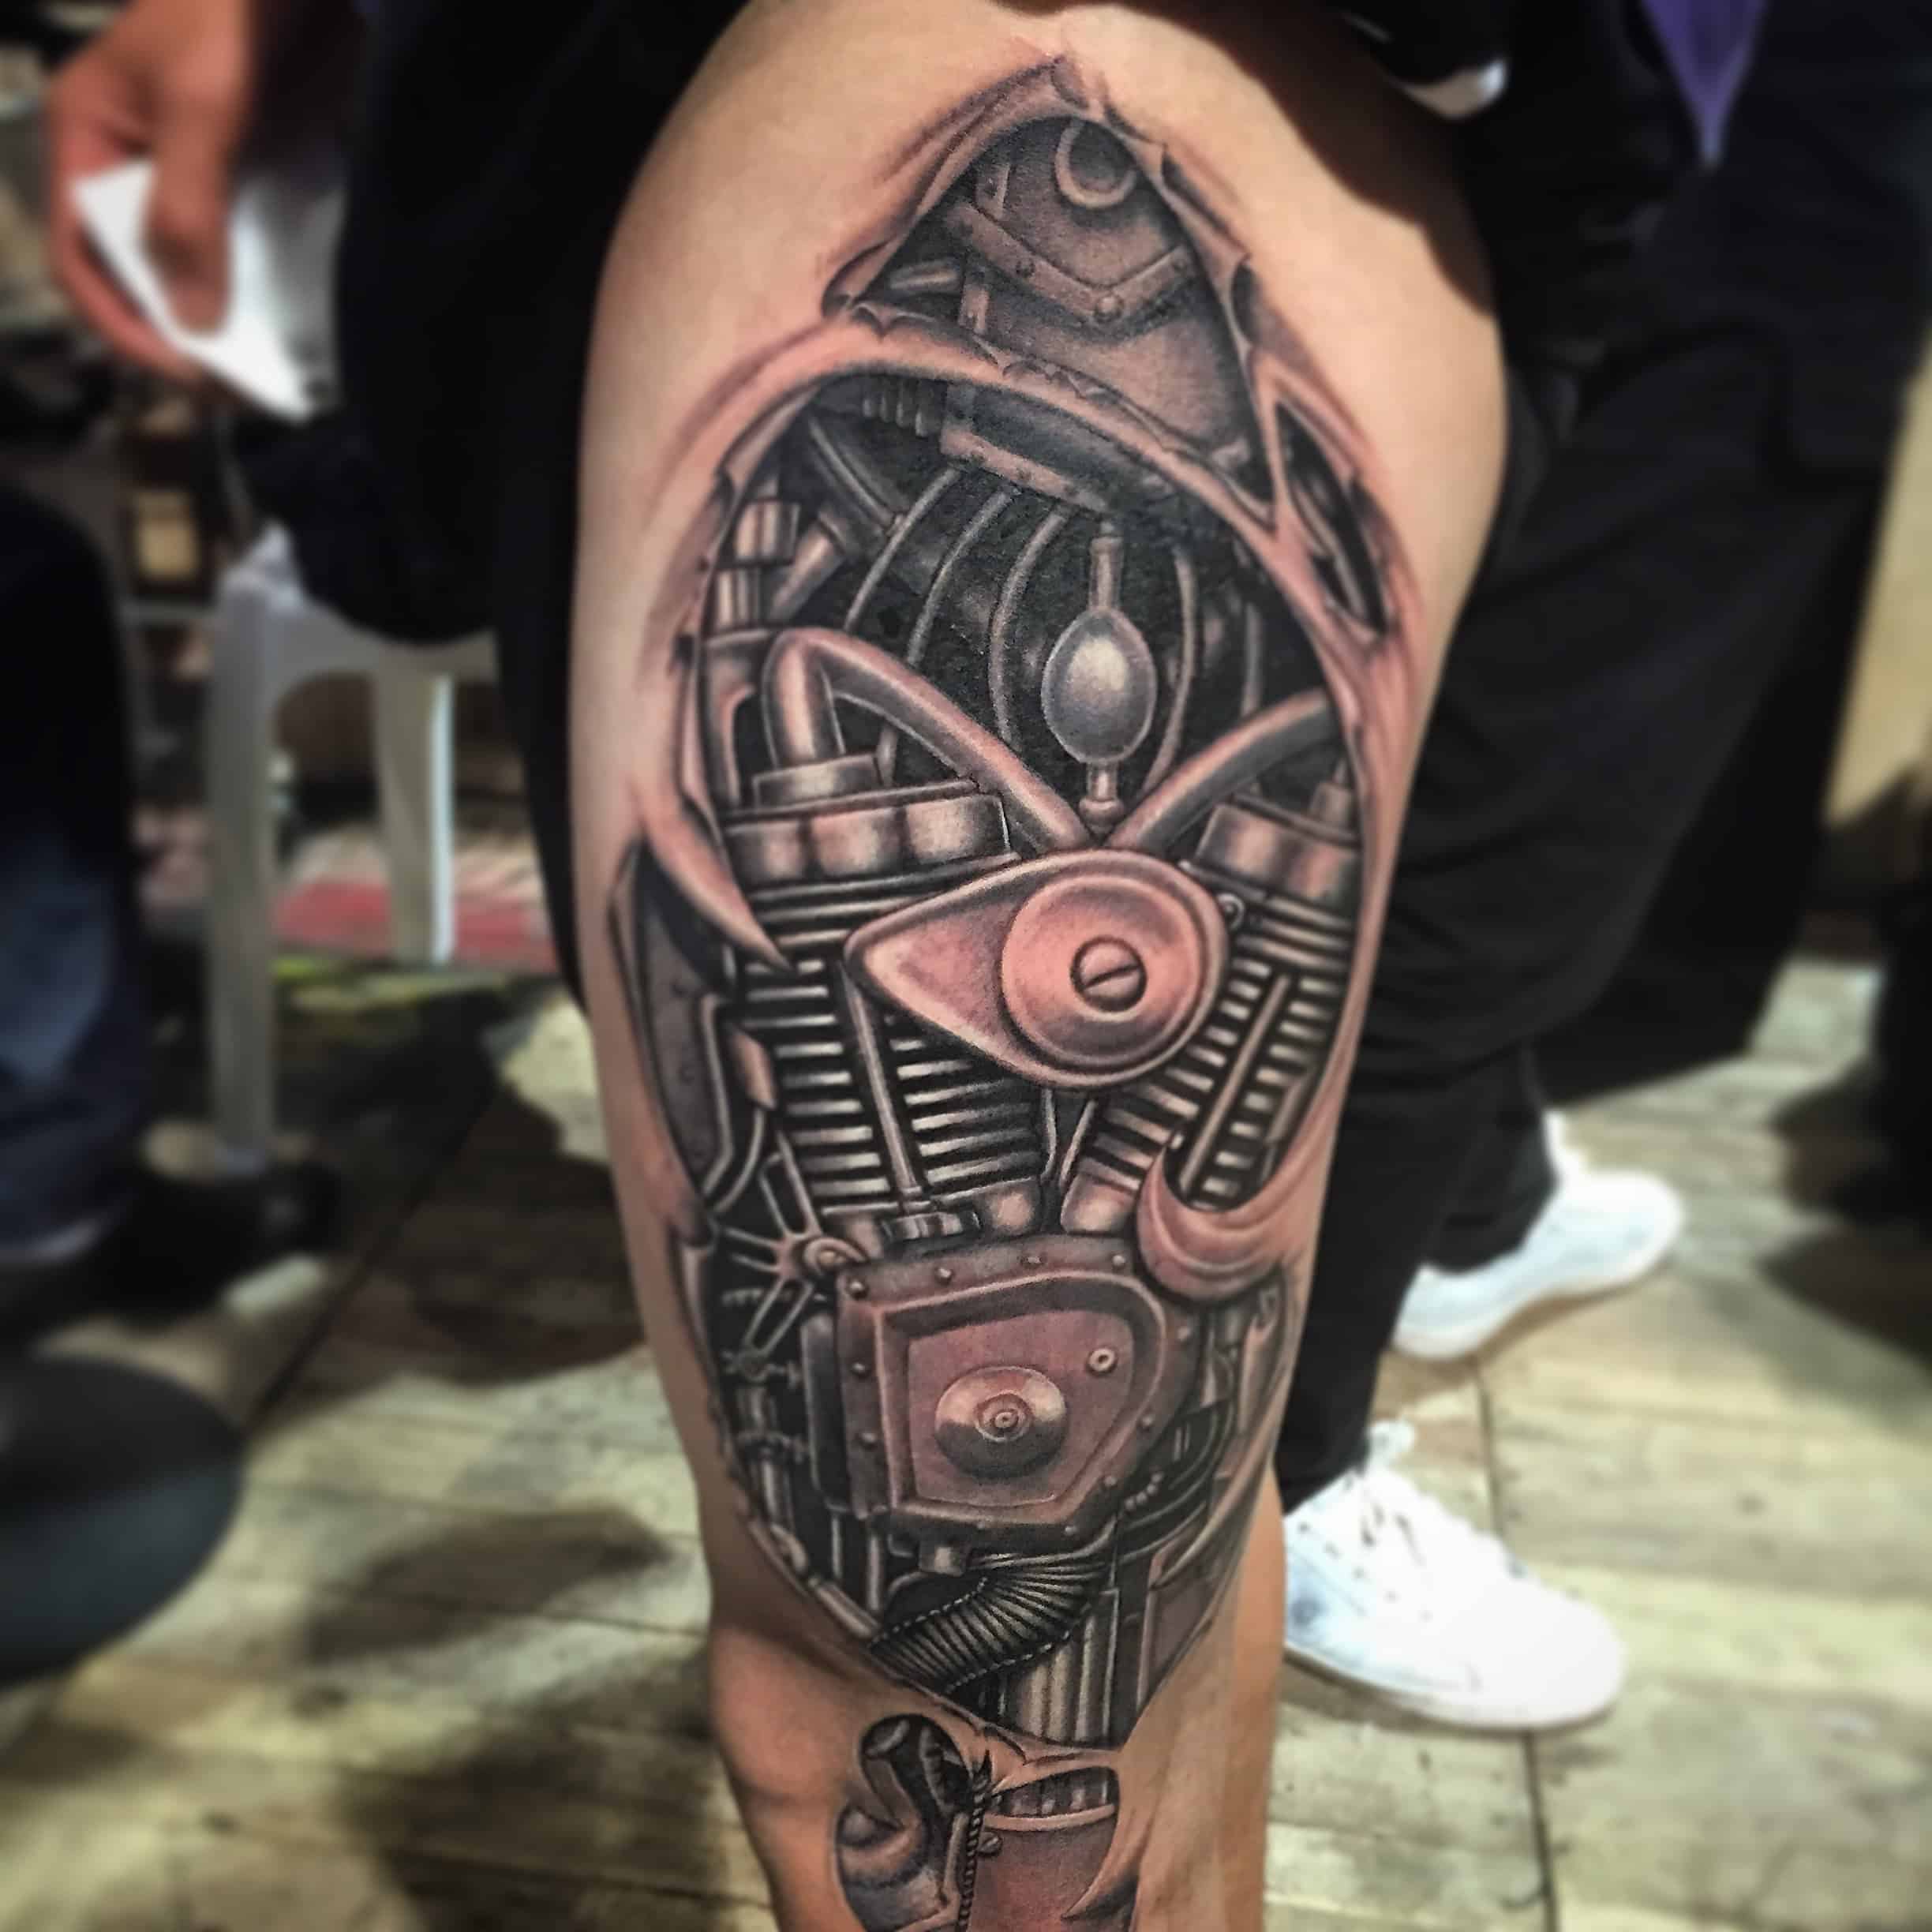 45 Best Biomechanical Tattoos Designs [ 2017 Collection ]